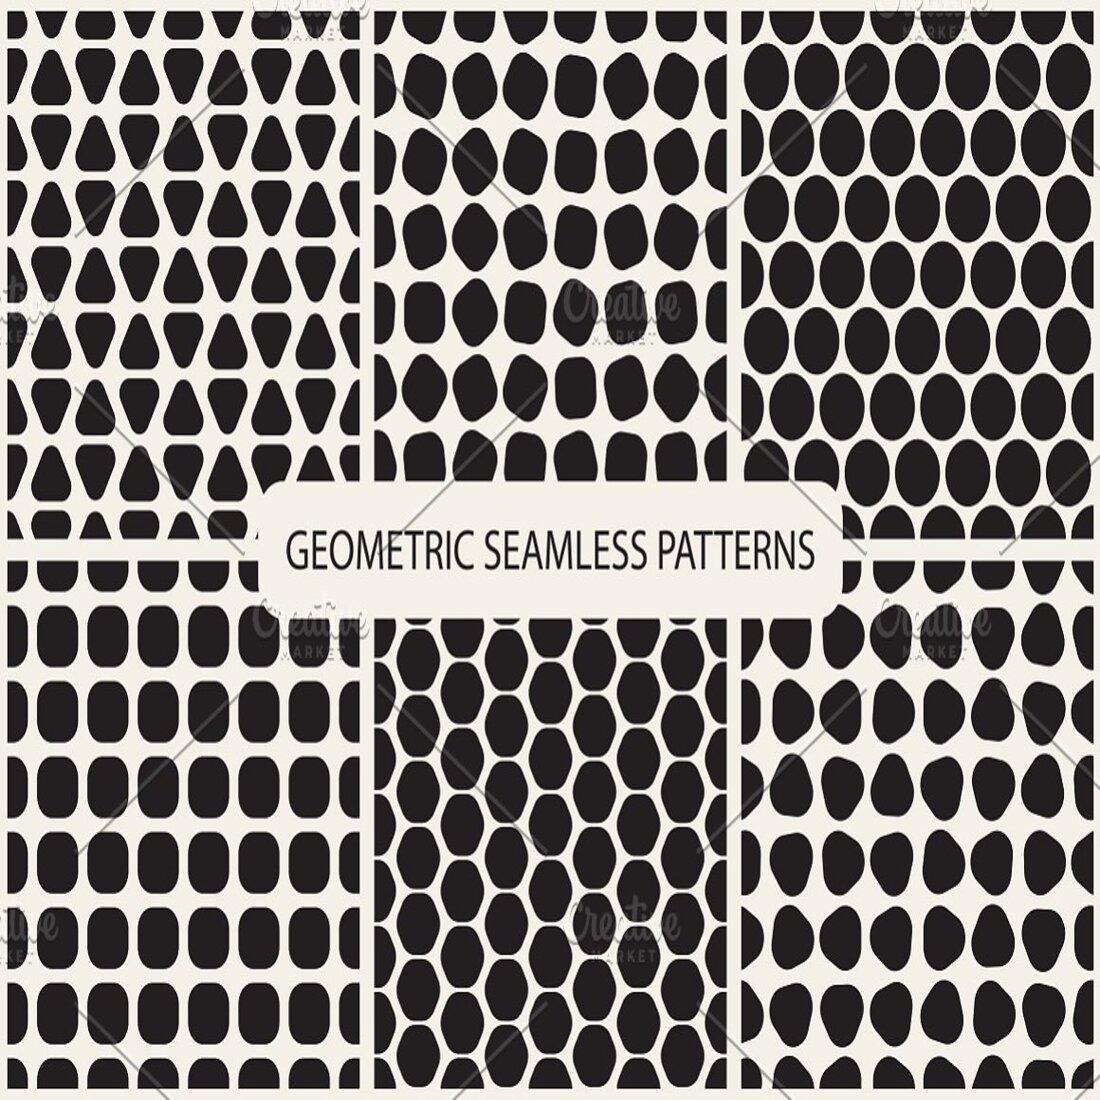 Seamless geometric patterns. 3 color cover.